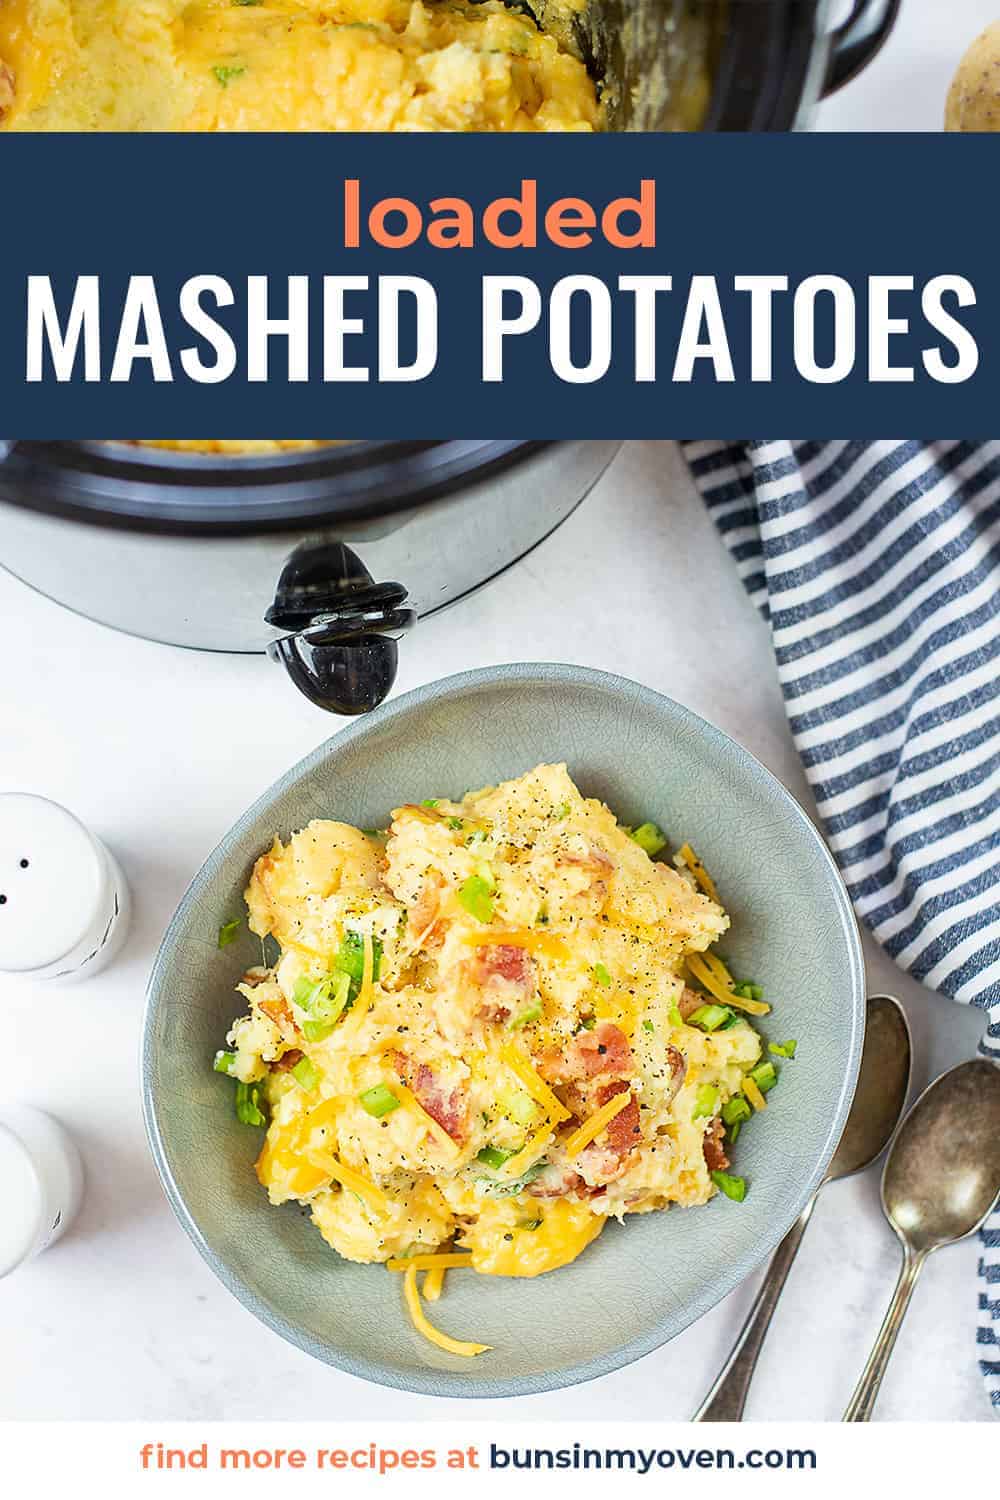 overhead view of mashed potatoes in crockpot with text for Pinterest.